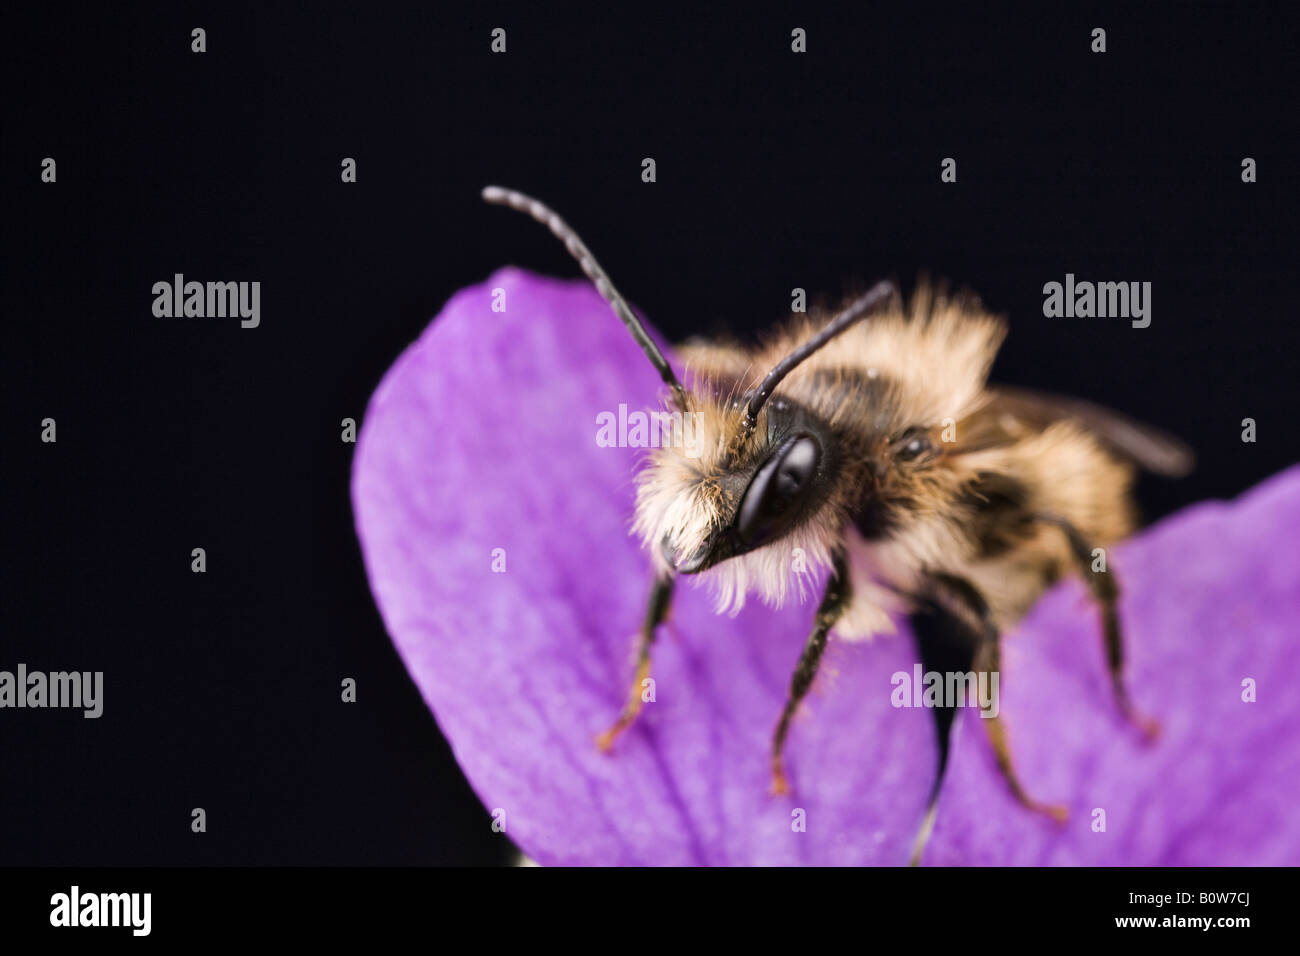 Male Red Mason bee (Osmia bicornis) perched on a Heath Dog-Violet or Dog Violet (Viola canina) Stock Photo